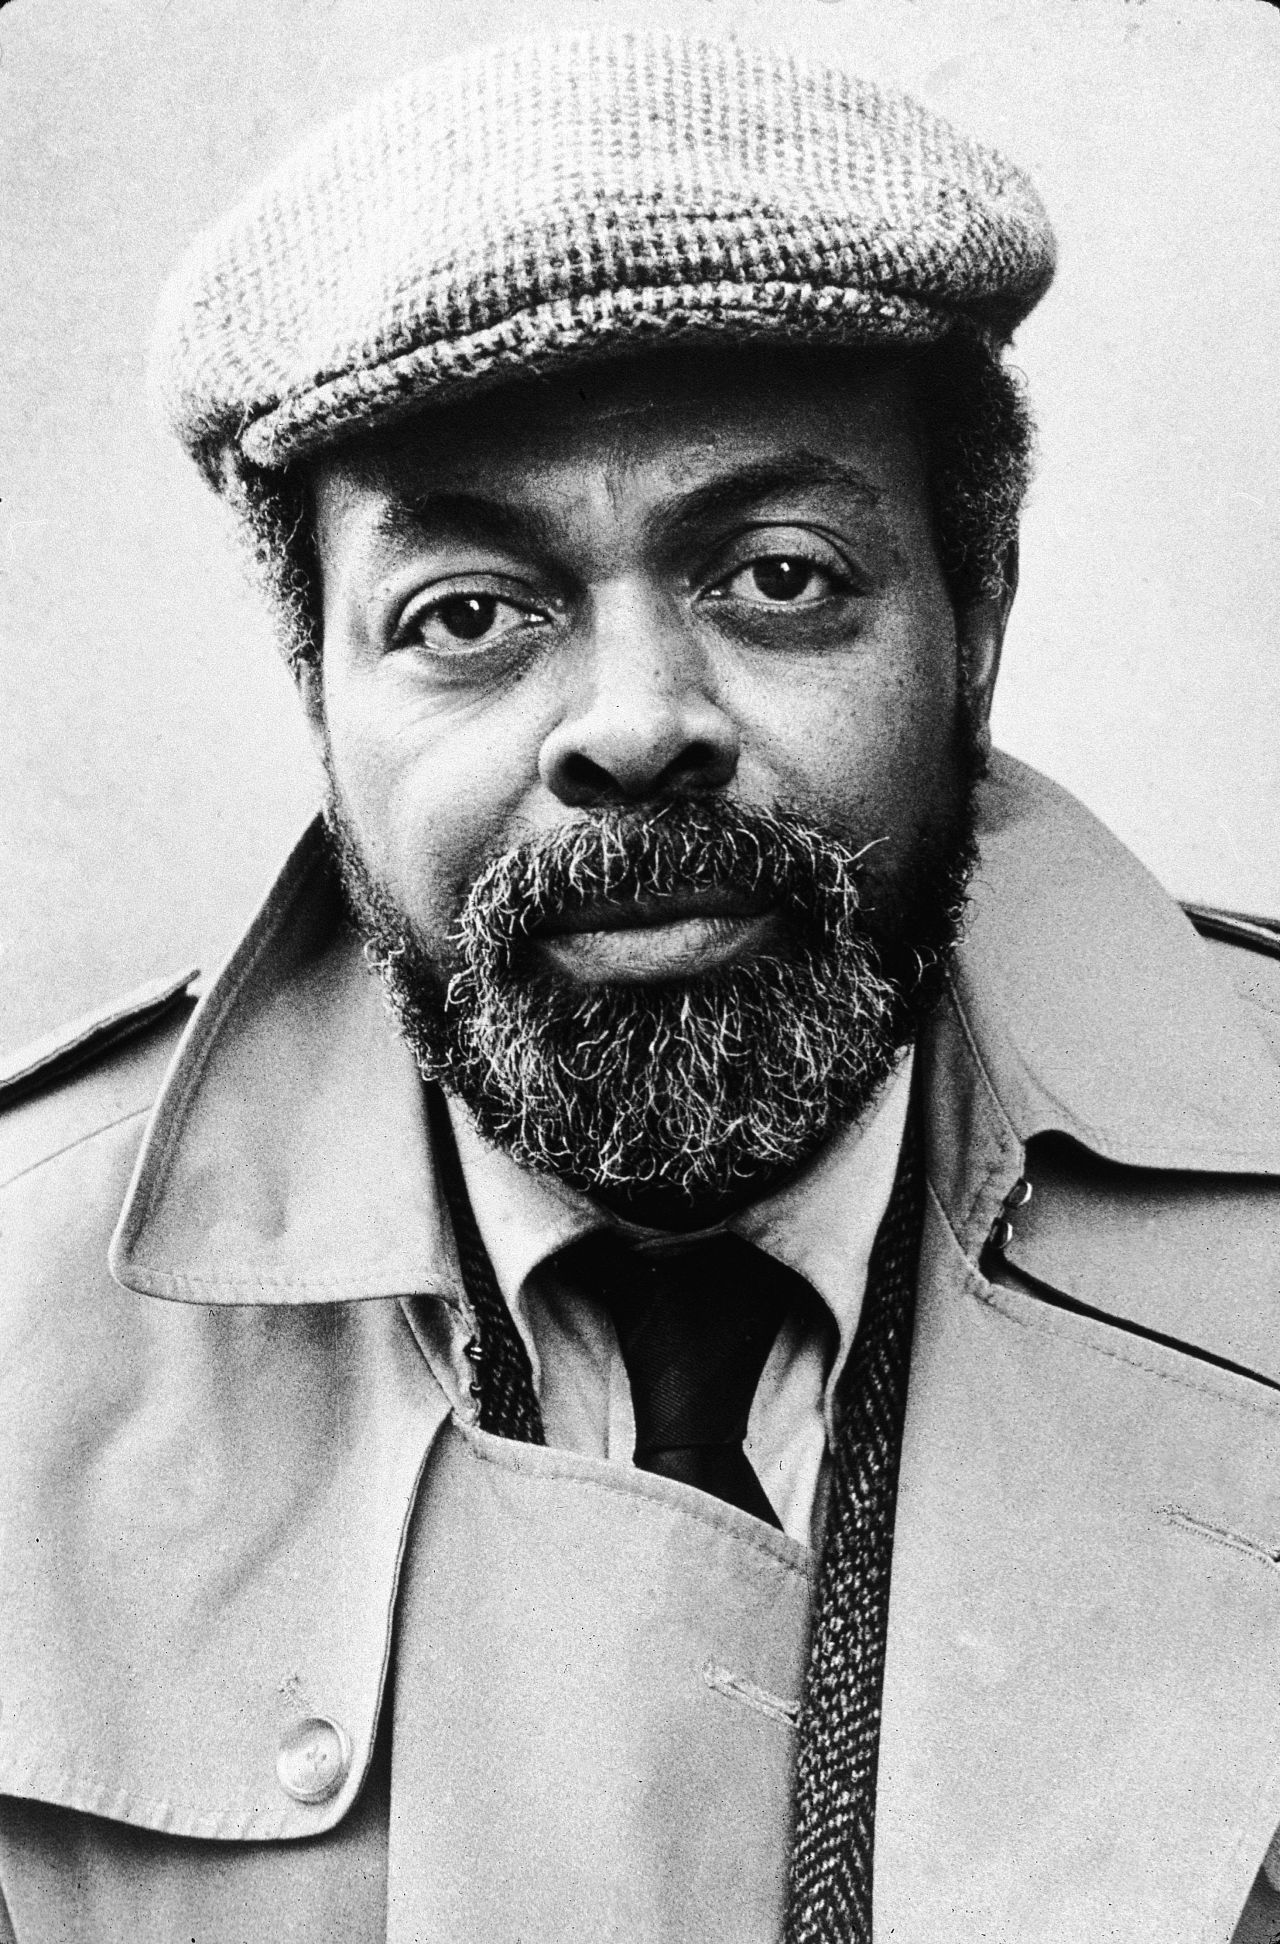 Poet<a href="http://www.cnn.com/2014/01/09/showbiz/poet-amiri-baraka-dies/index.html" target="_blank"> Amiri Baraka</a>, who lost his post as New Jersey's poet laureate because of a controversial poem about the 9/11 terror attacks, died on January 9, his agent said. Baraka was 79.